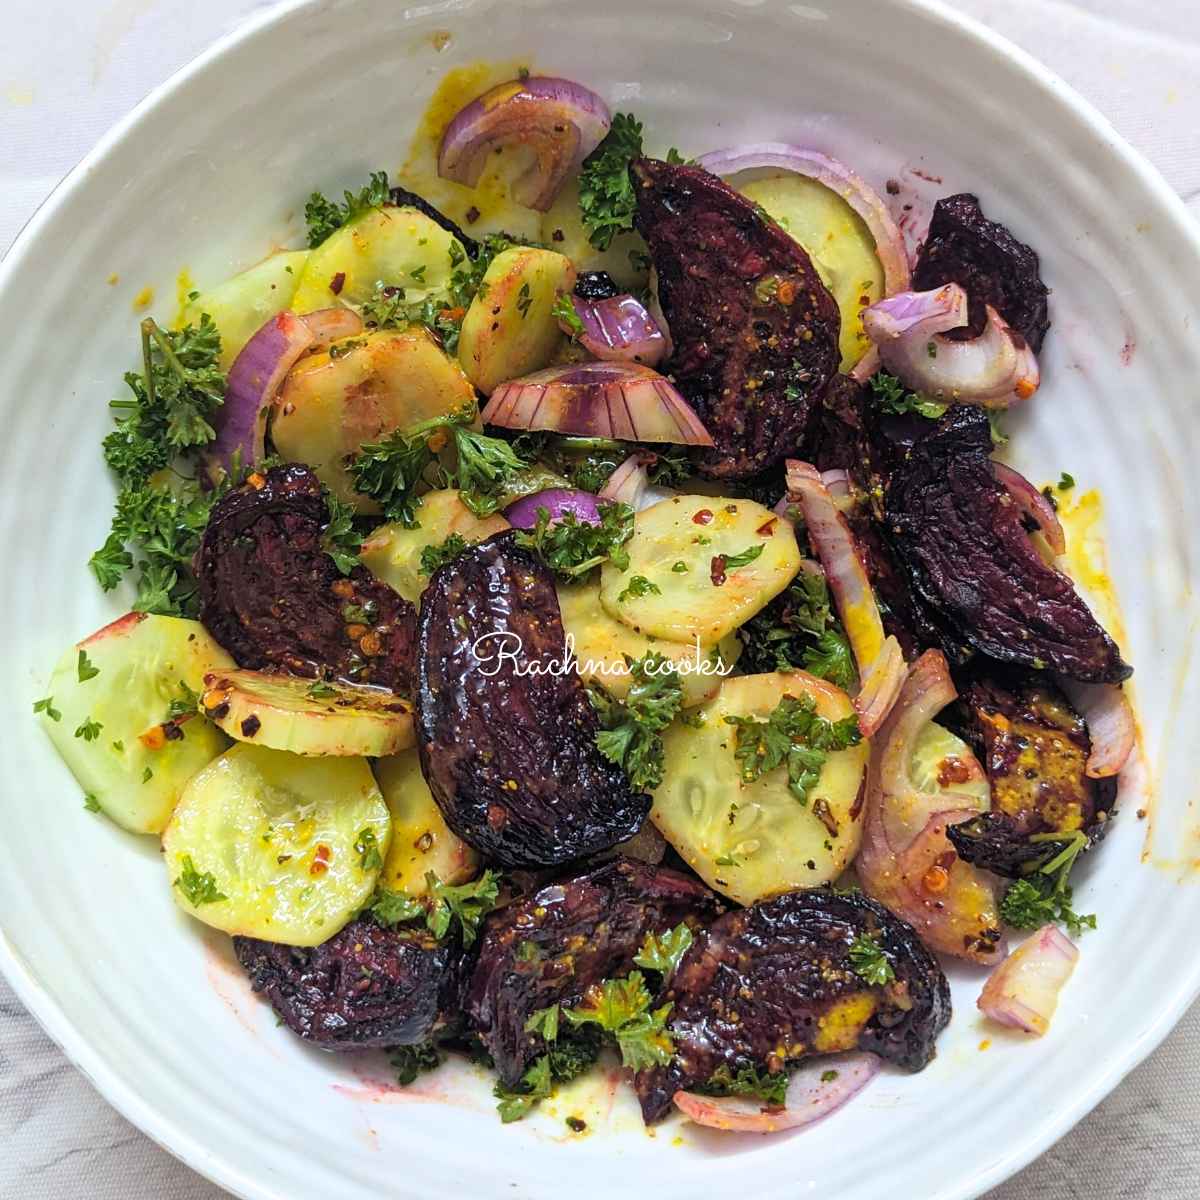 Cucumber and beet salad in a bowl